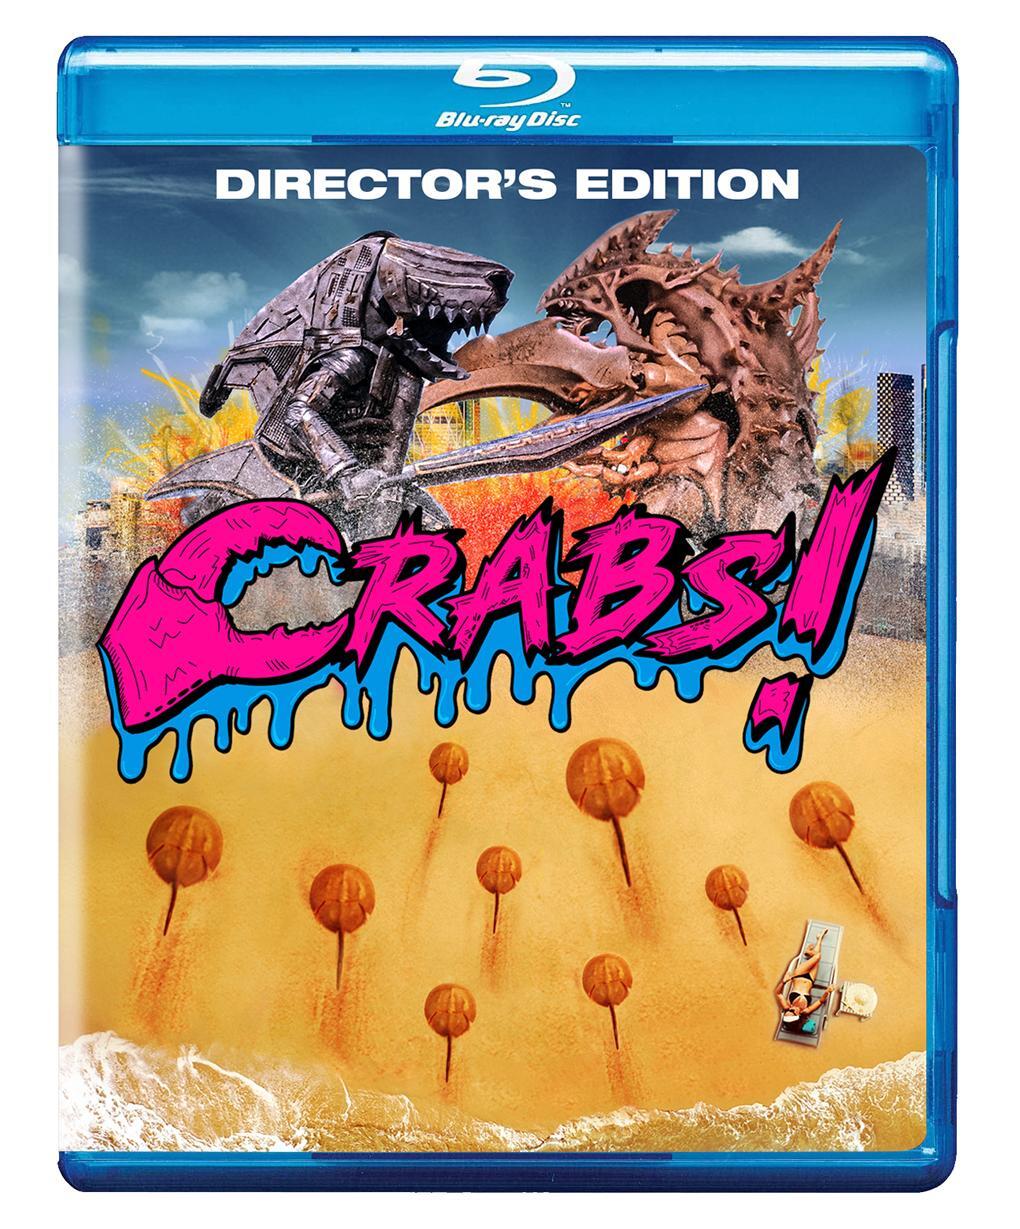 Crabs! Blu-ray (Director's Edition)